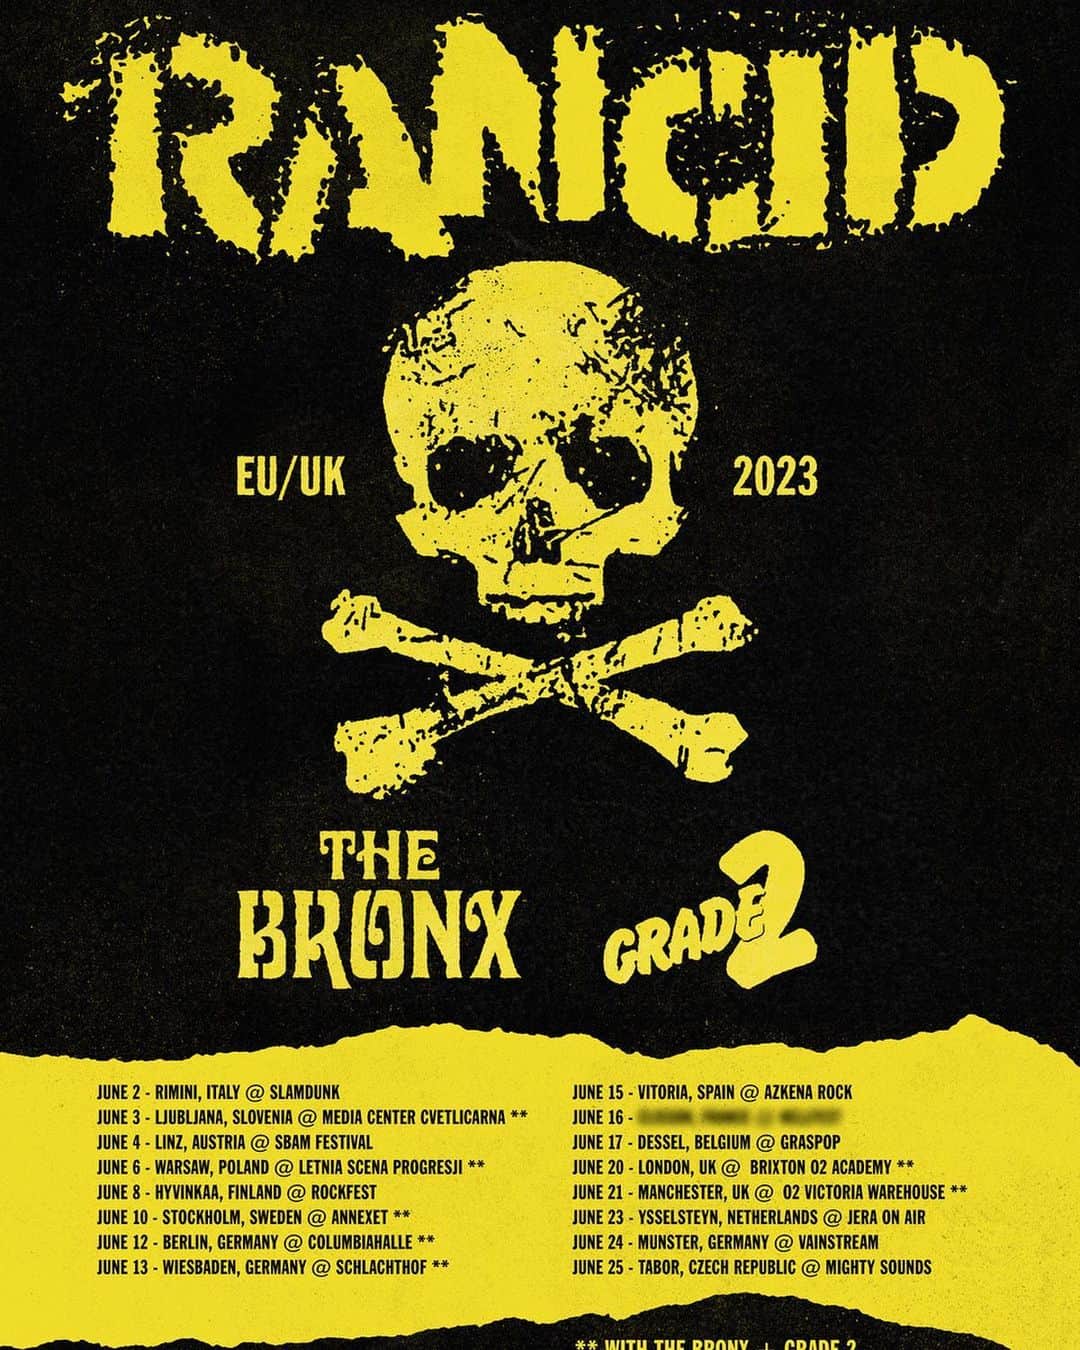 Rancidのインスタグラム：「Europe & U.K.  We are headed your way in 2023.  Festival dates and select headline shows.  Tickets for the headline shows with The Bronx and Grade 2 listed below are on-sale Friday at 10AM GMT.  www.rancidrancid.com/tour  June 3 - Ljubljana, Slovenia @ Media Center Cvetlicarna June 6 - Warsaw, Poland @ Letnia Scena Progresji June 10 - Stockholm, Sweden @ Annexet June 12 - Berlin, Germany @ Columbiahalle June 13 - Wiesbaden, Germany @ Schlachthof June 20 - London, UK @ Brixton 02 Academy June 21 - Manchester, UK @ 02 Victoria Warehouse」